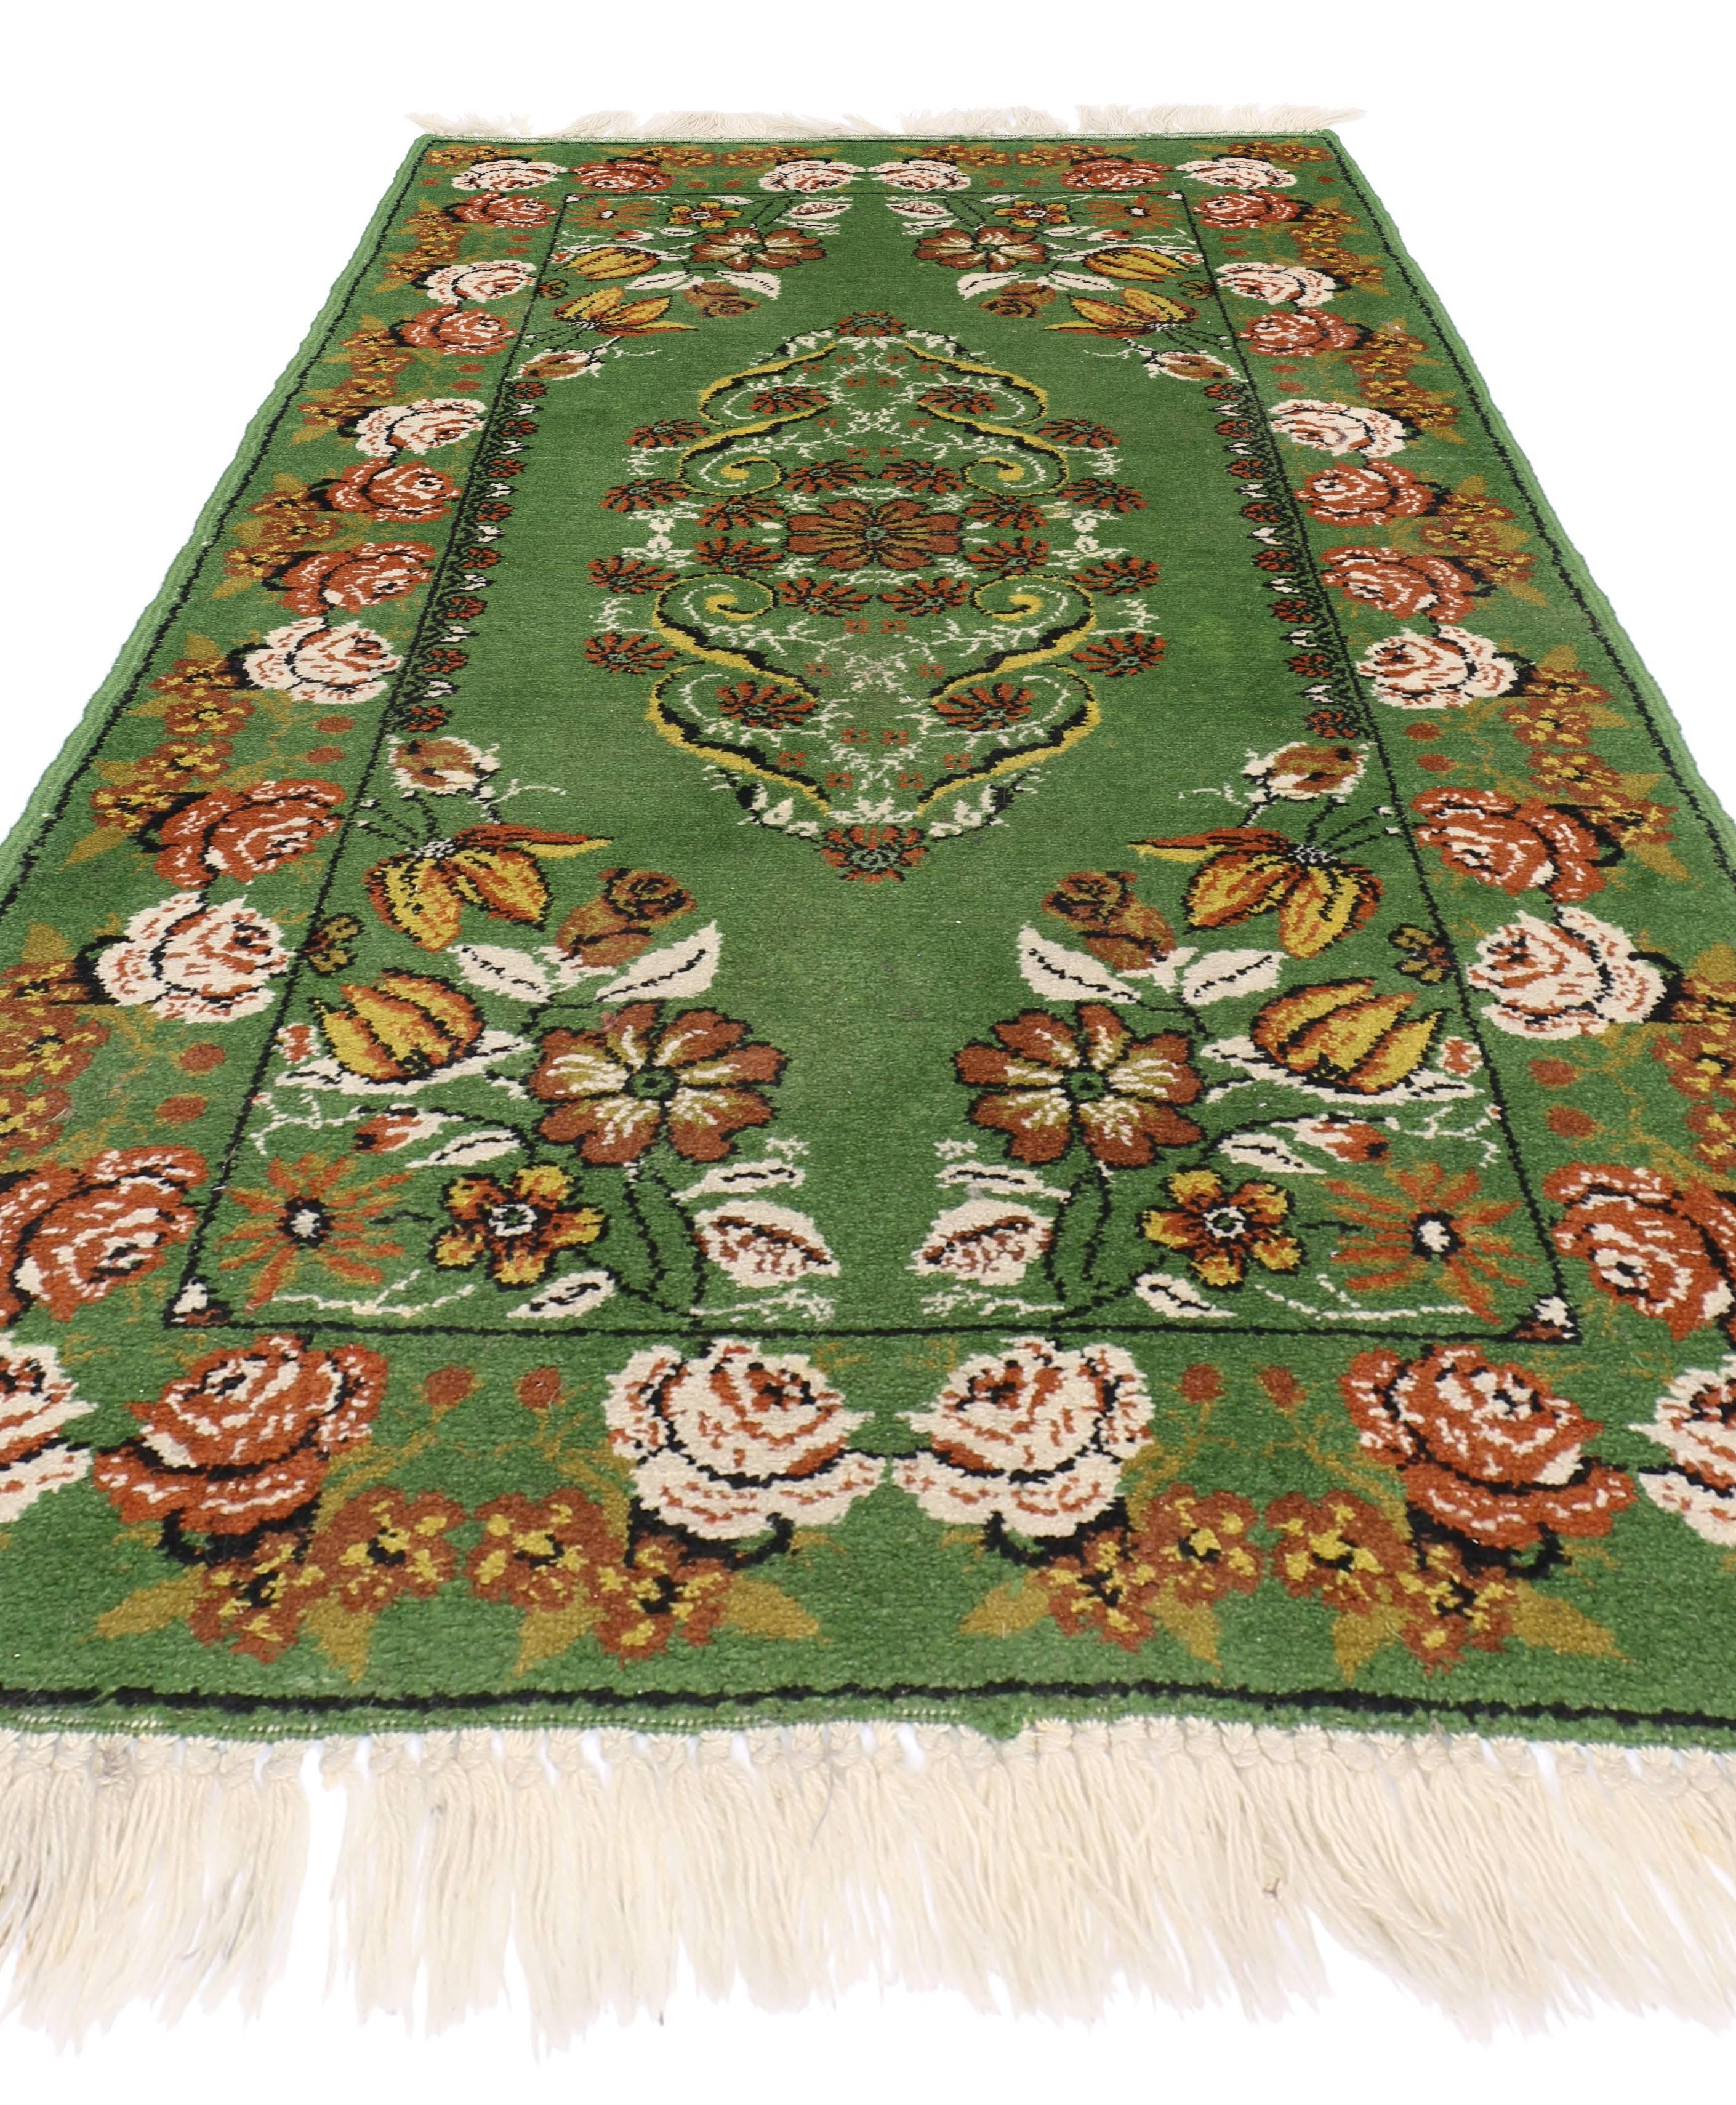 20th Century Green Vintage Moroccan Accent Rug, Foyer or Entryway Rug